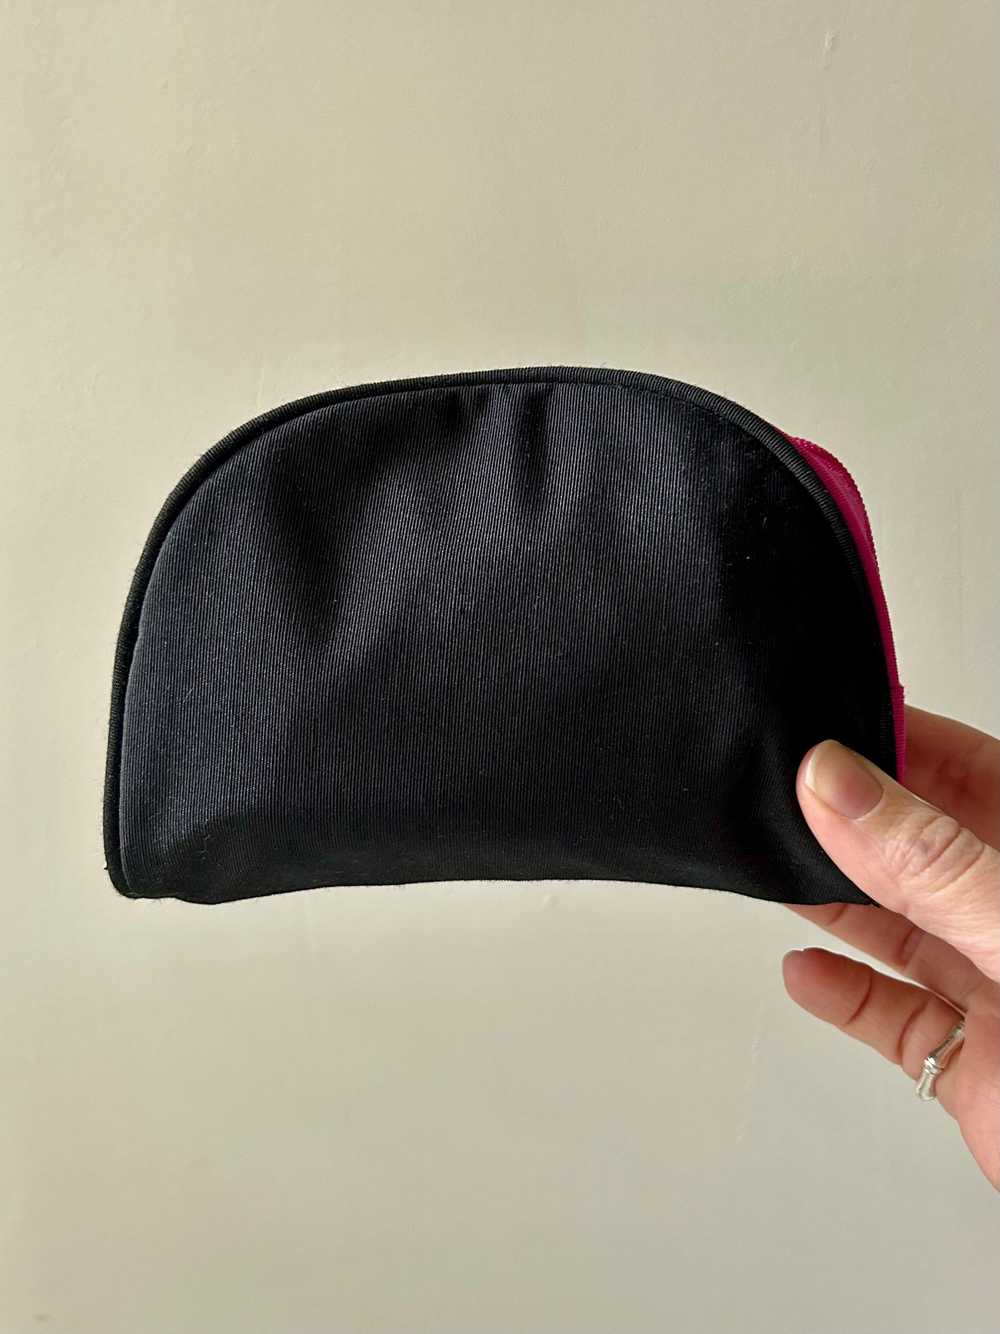 Vintage YSL Black and Hot Pink Makeup Pouch - image 4